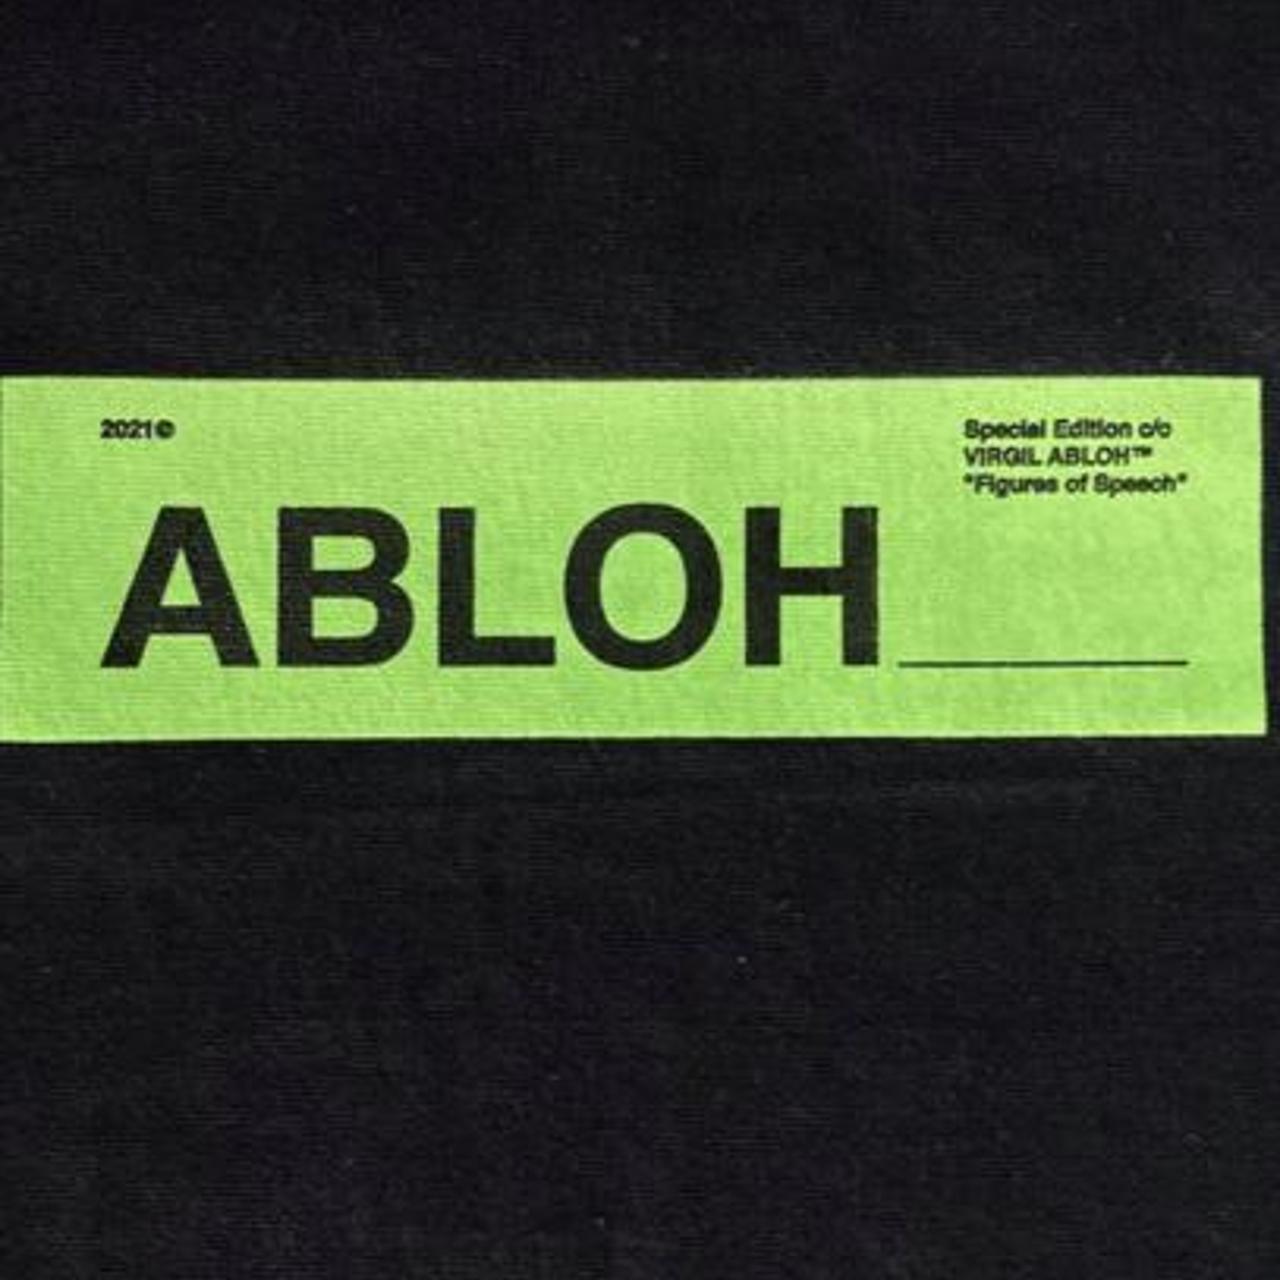 Virgil Abloh: Figures of Speech Special Edition